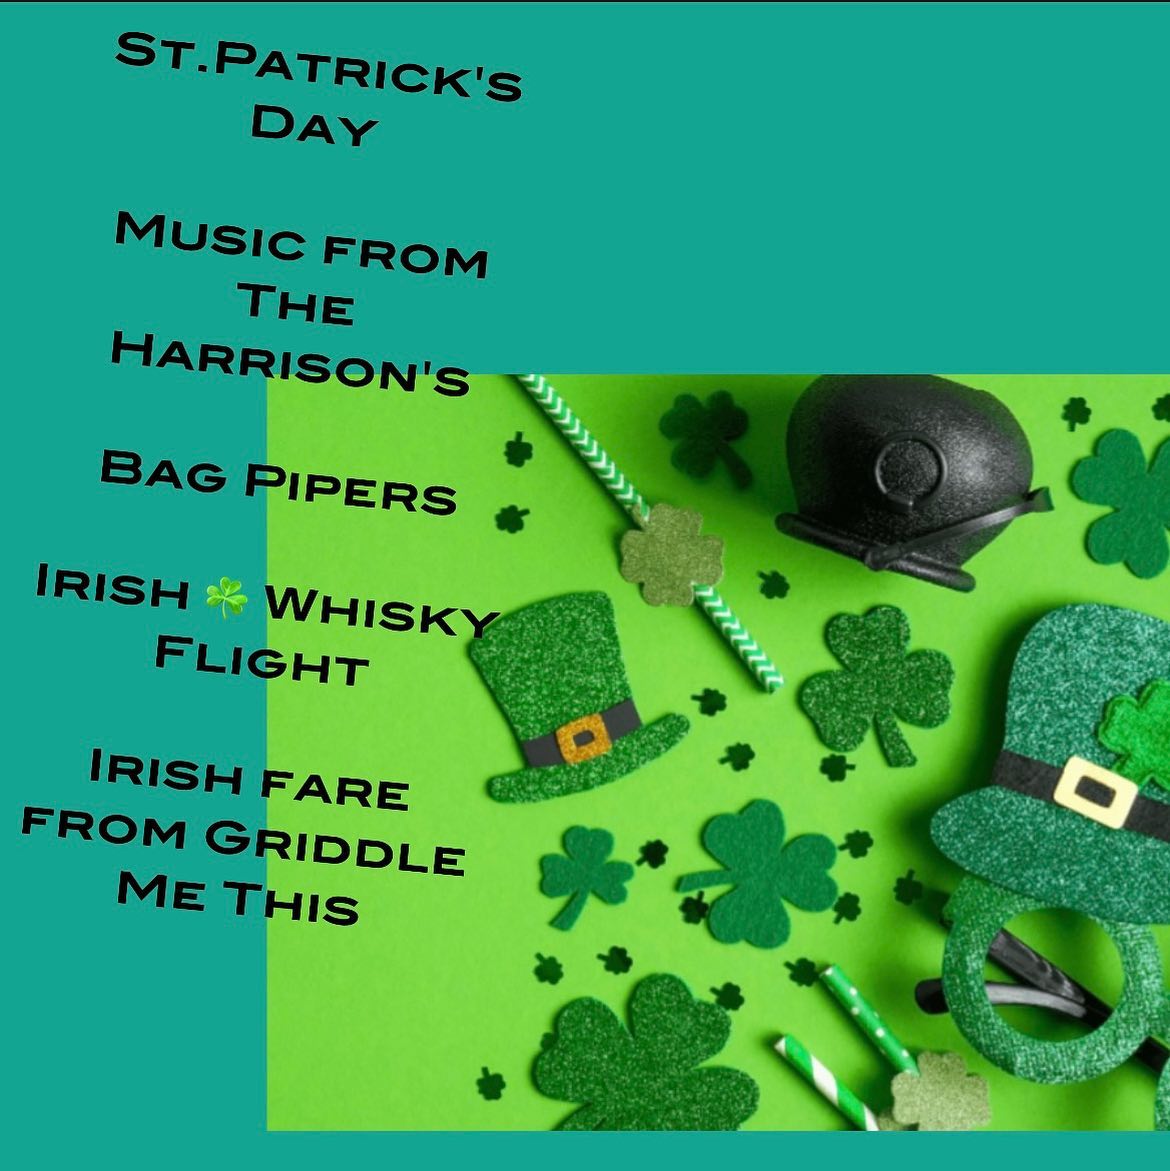 Celebrate St. Patrick's Day with The Harrison's @ The Last Whisky Bar